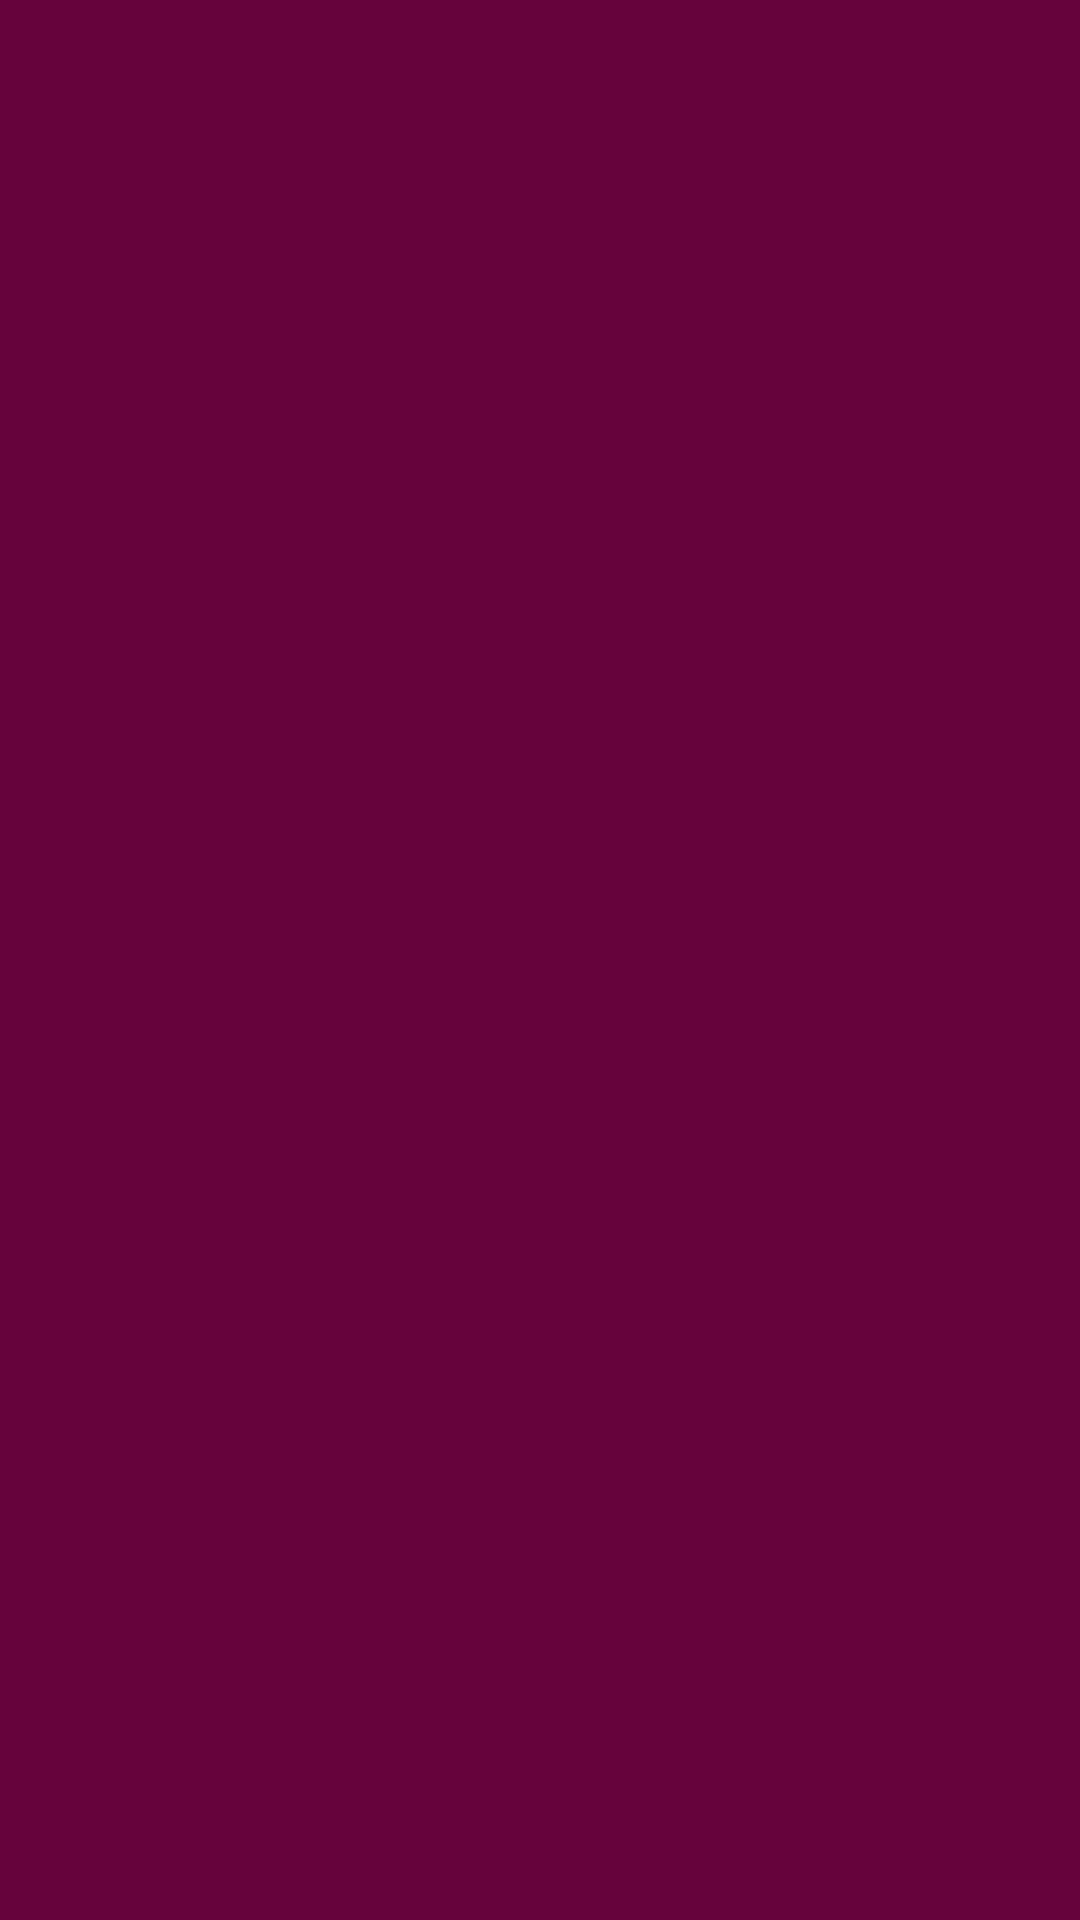 1080x1920 Imperial Purple Solid Color Background